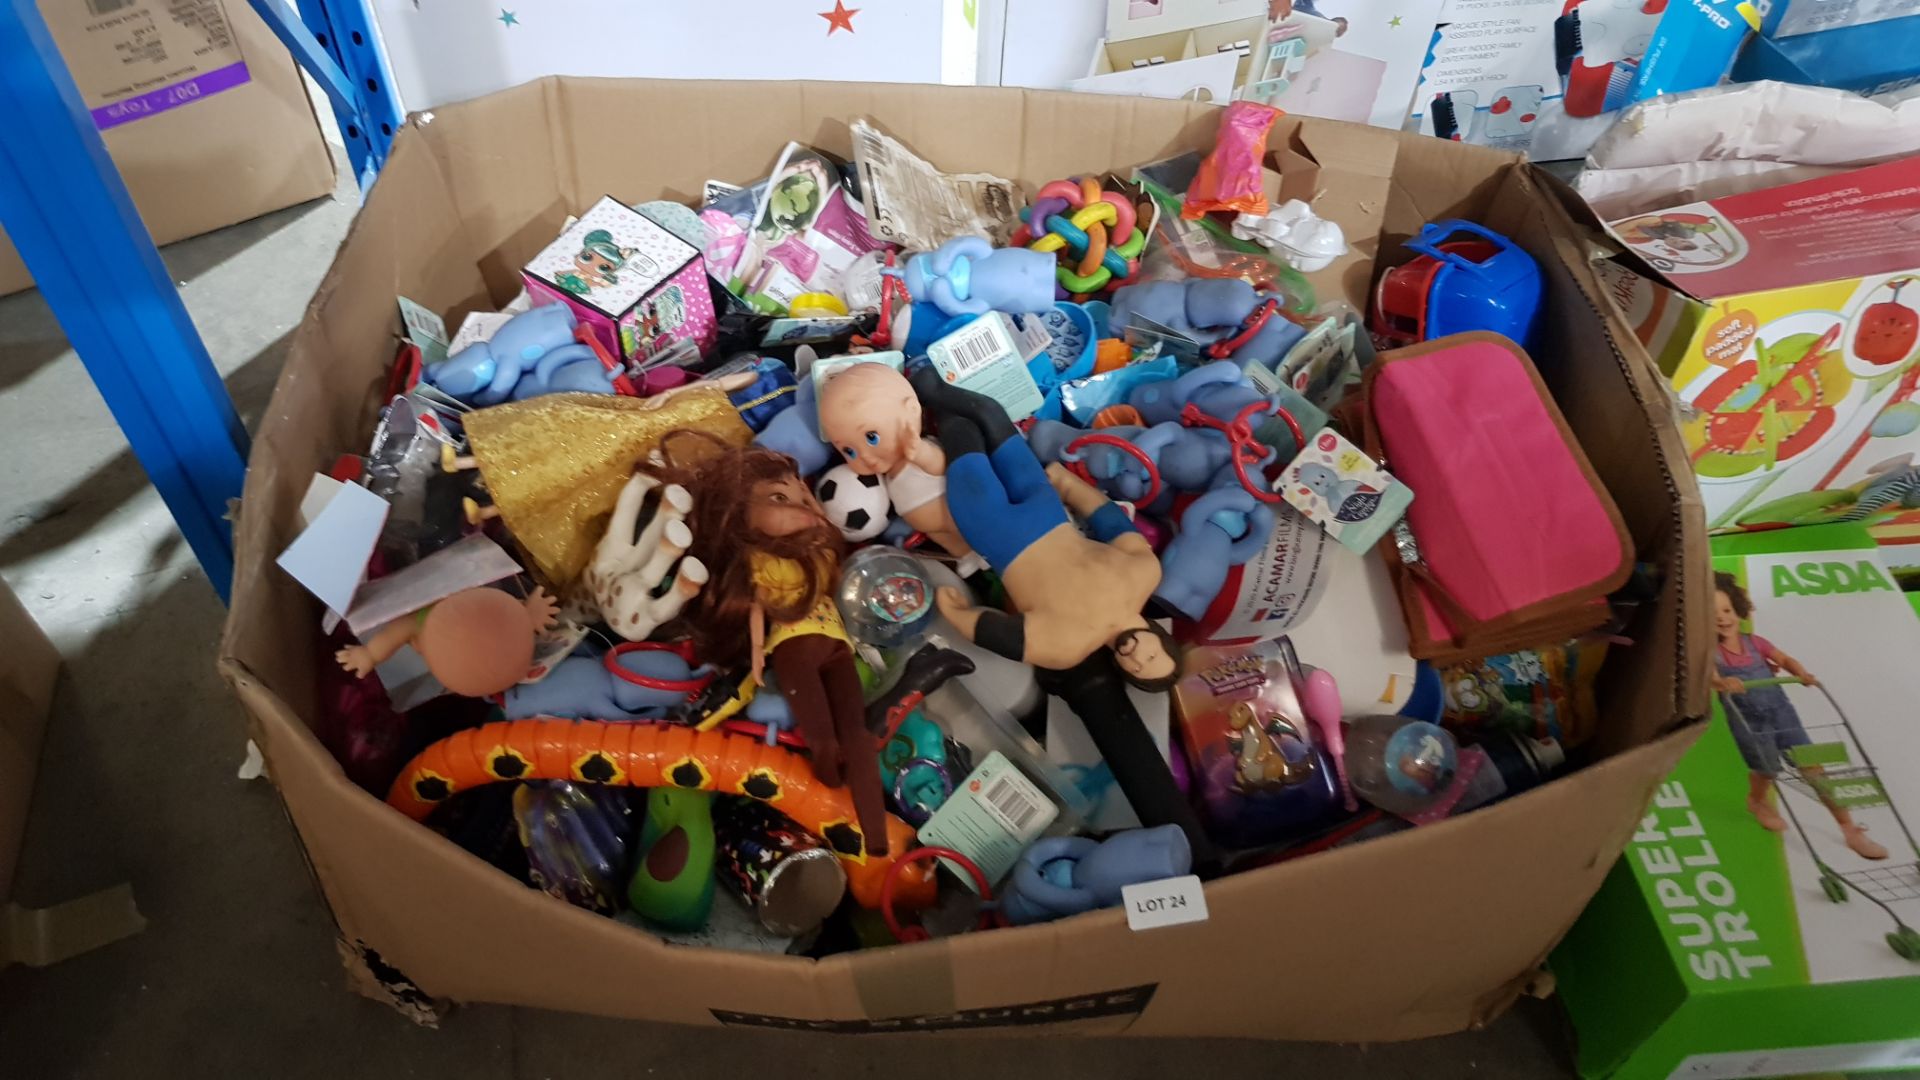 Contents Of Box Ð Mixed Small Toys To Inc Lol Surprise!, Iggle Piggle Peek A Boo, My Seet Bab...